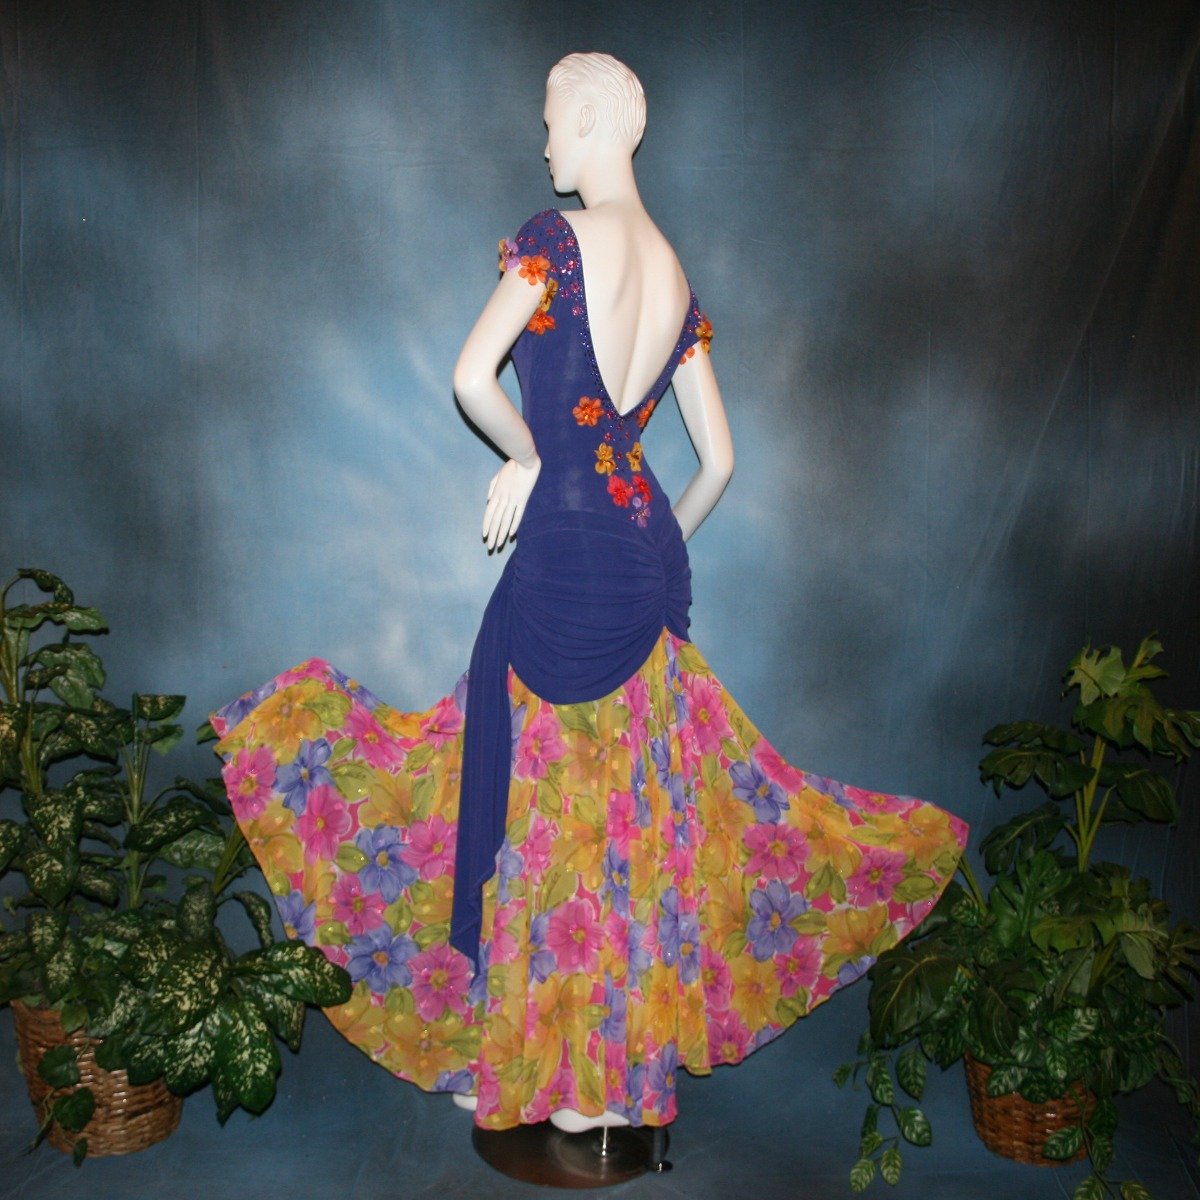 Crystal's Creations back view of Converta ballroom dress featuring a Latin/rhythm dress created in luxurious deep perwinkle solid slinky with lots of flounces in accents of a floral chiffon in yellow with pinks & purples 